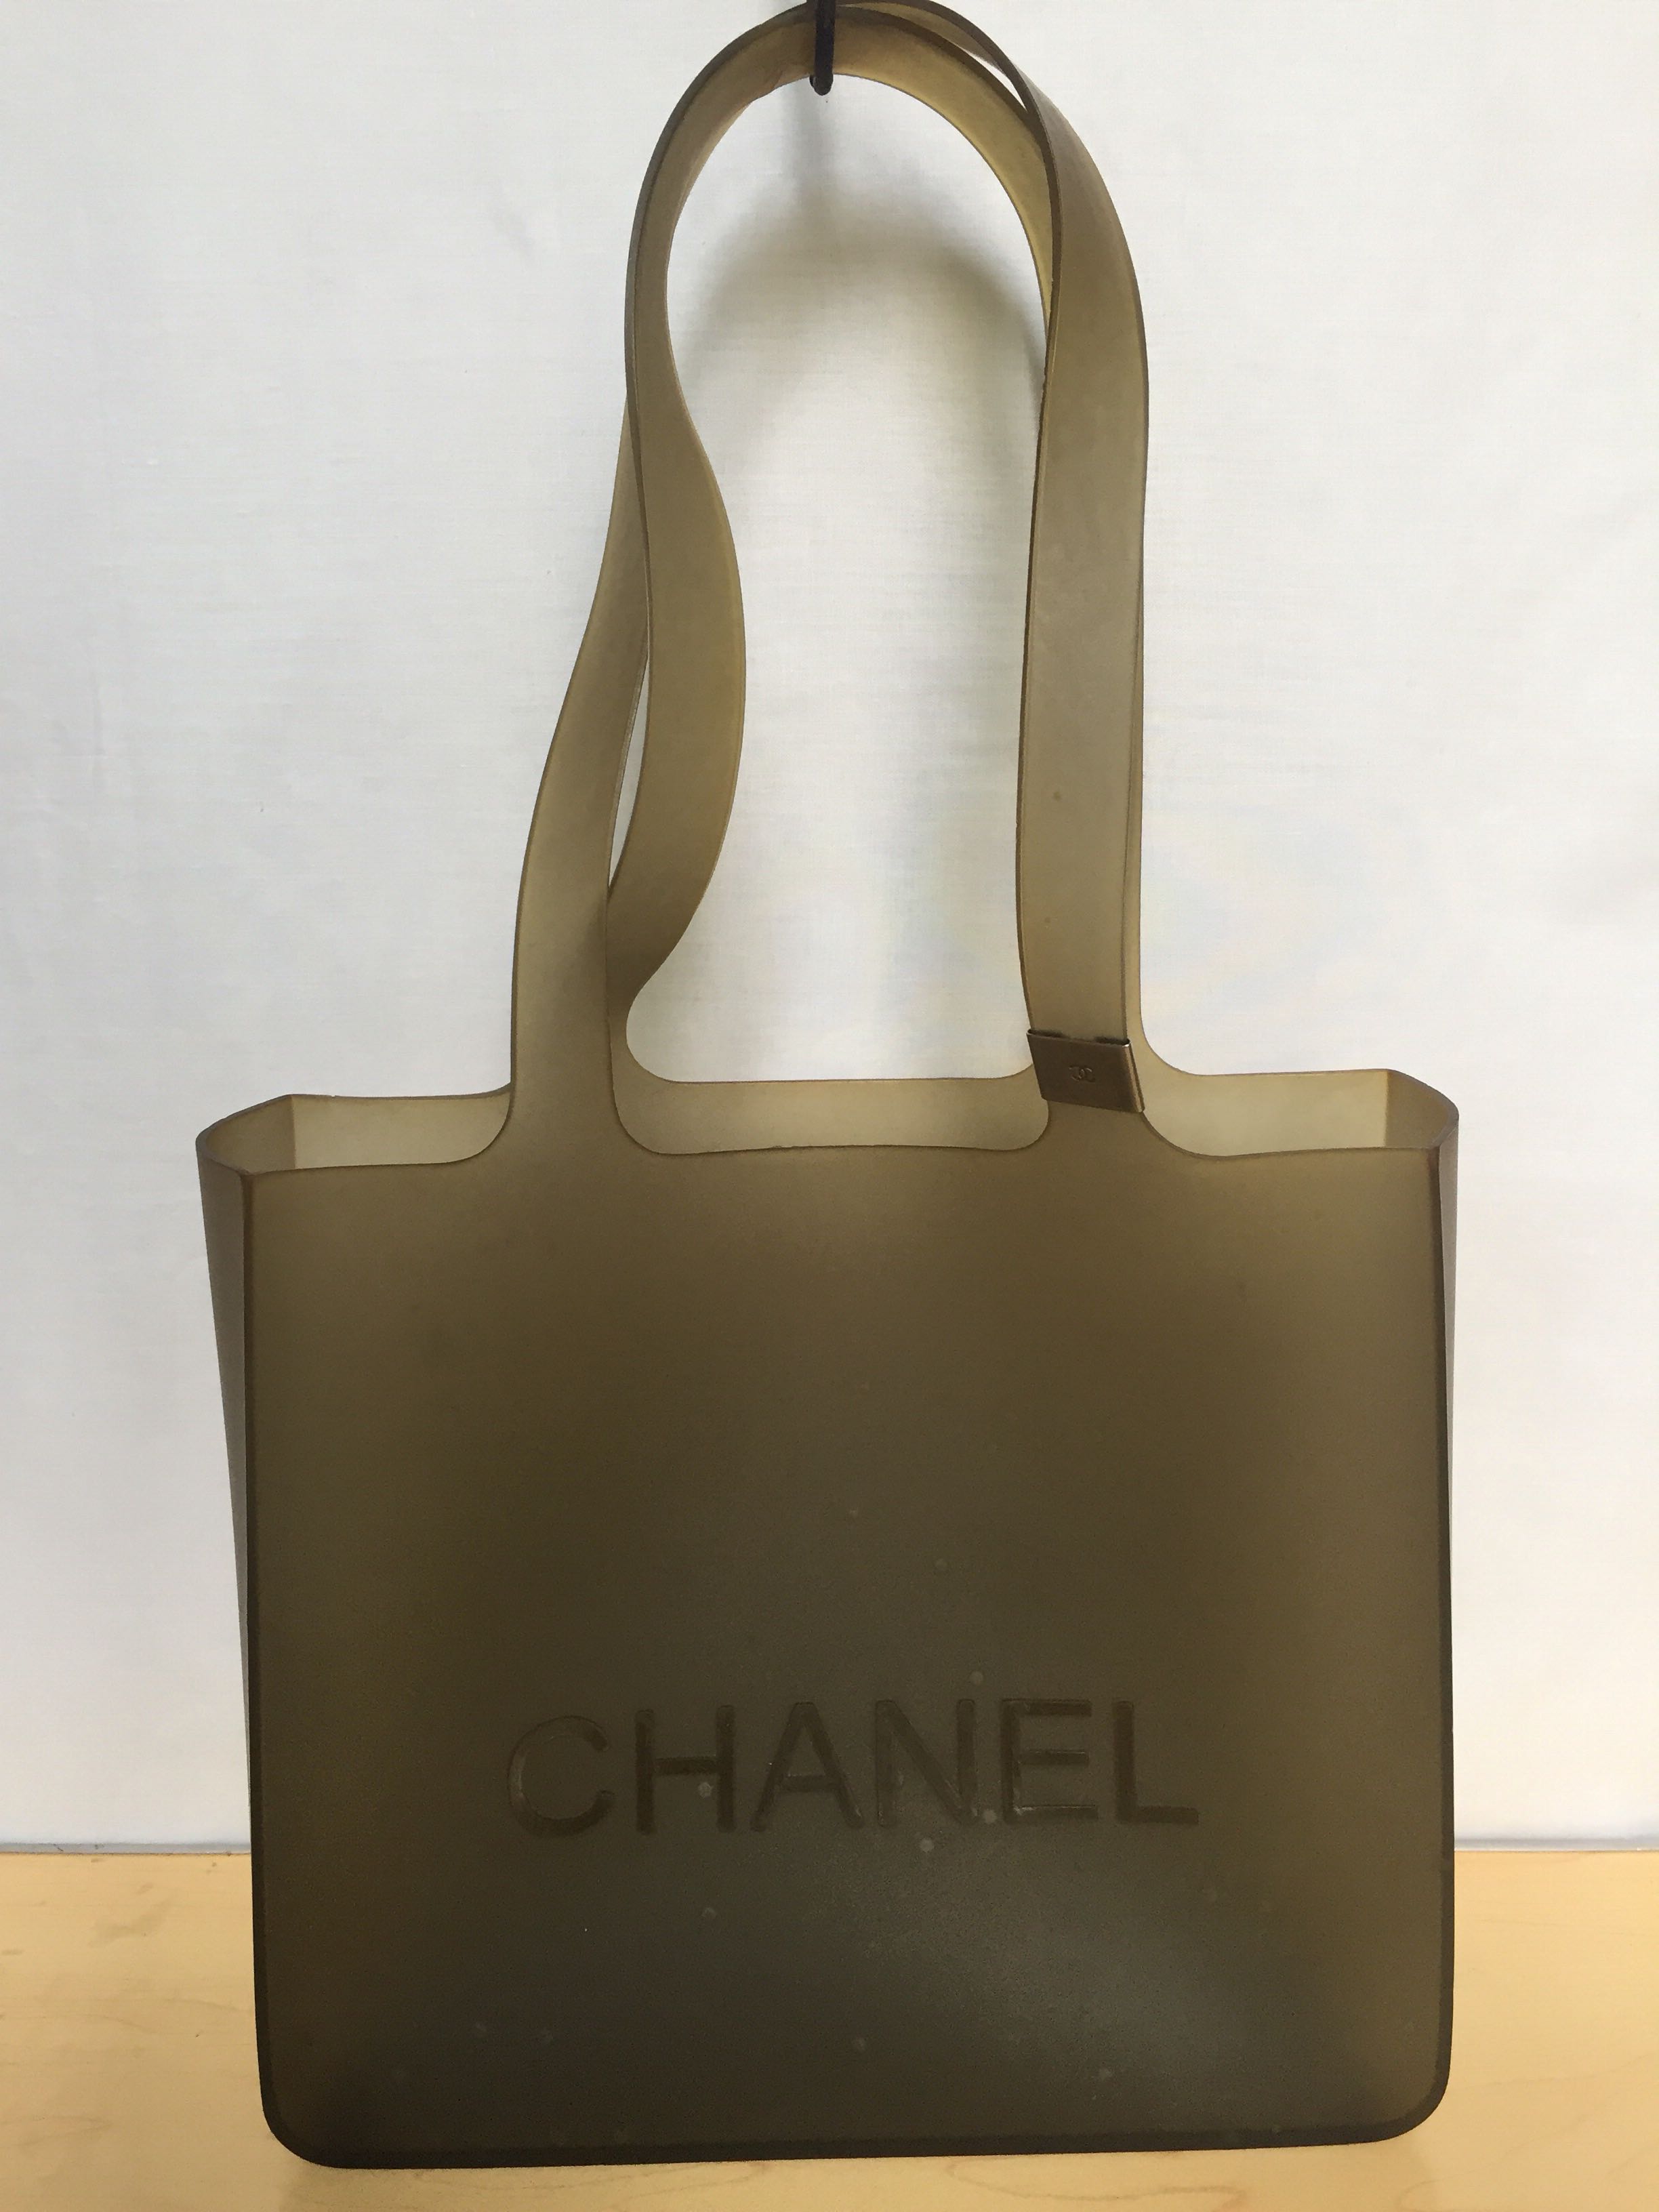 Authentic CHANEL Jelly Rubber Tote, Women's Fashion, Bags